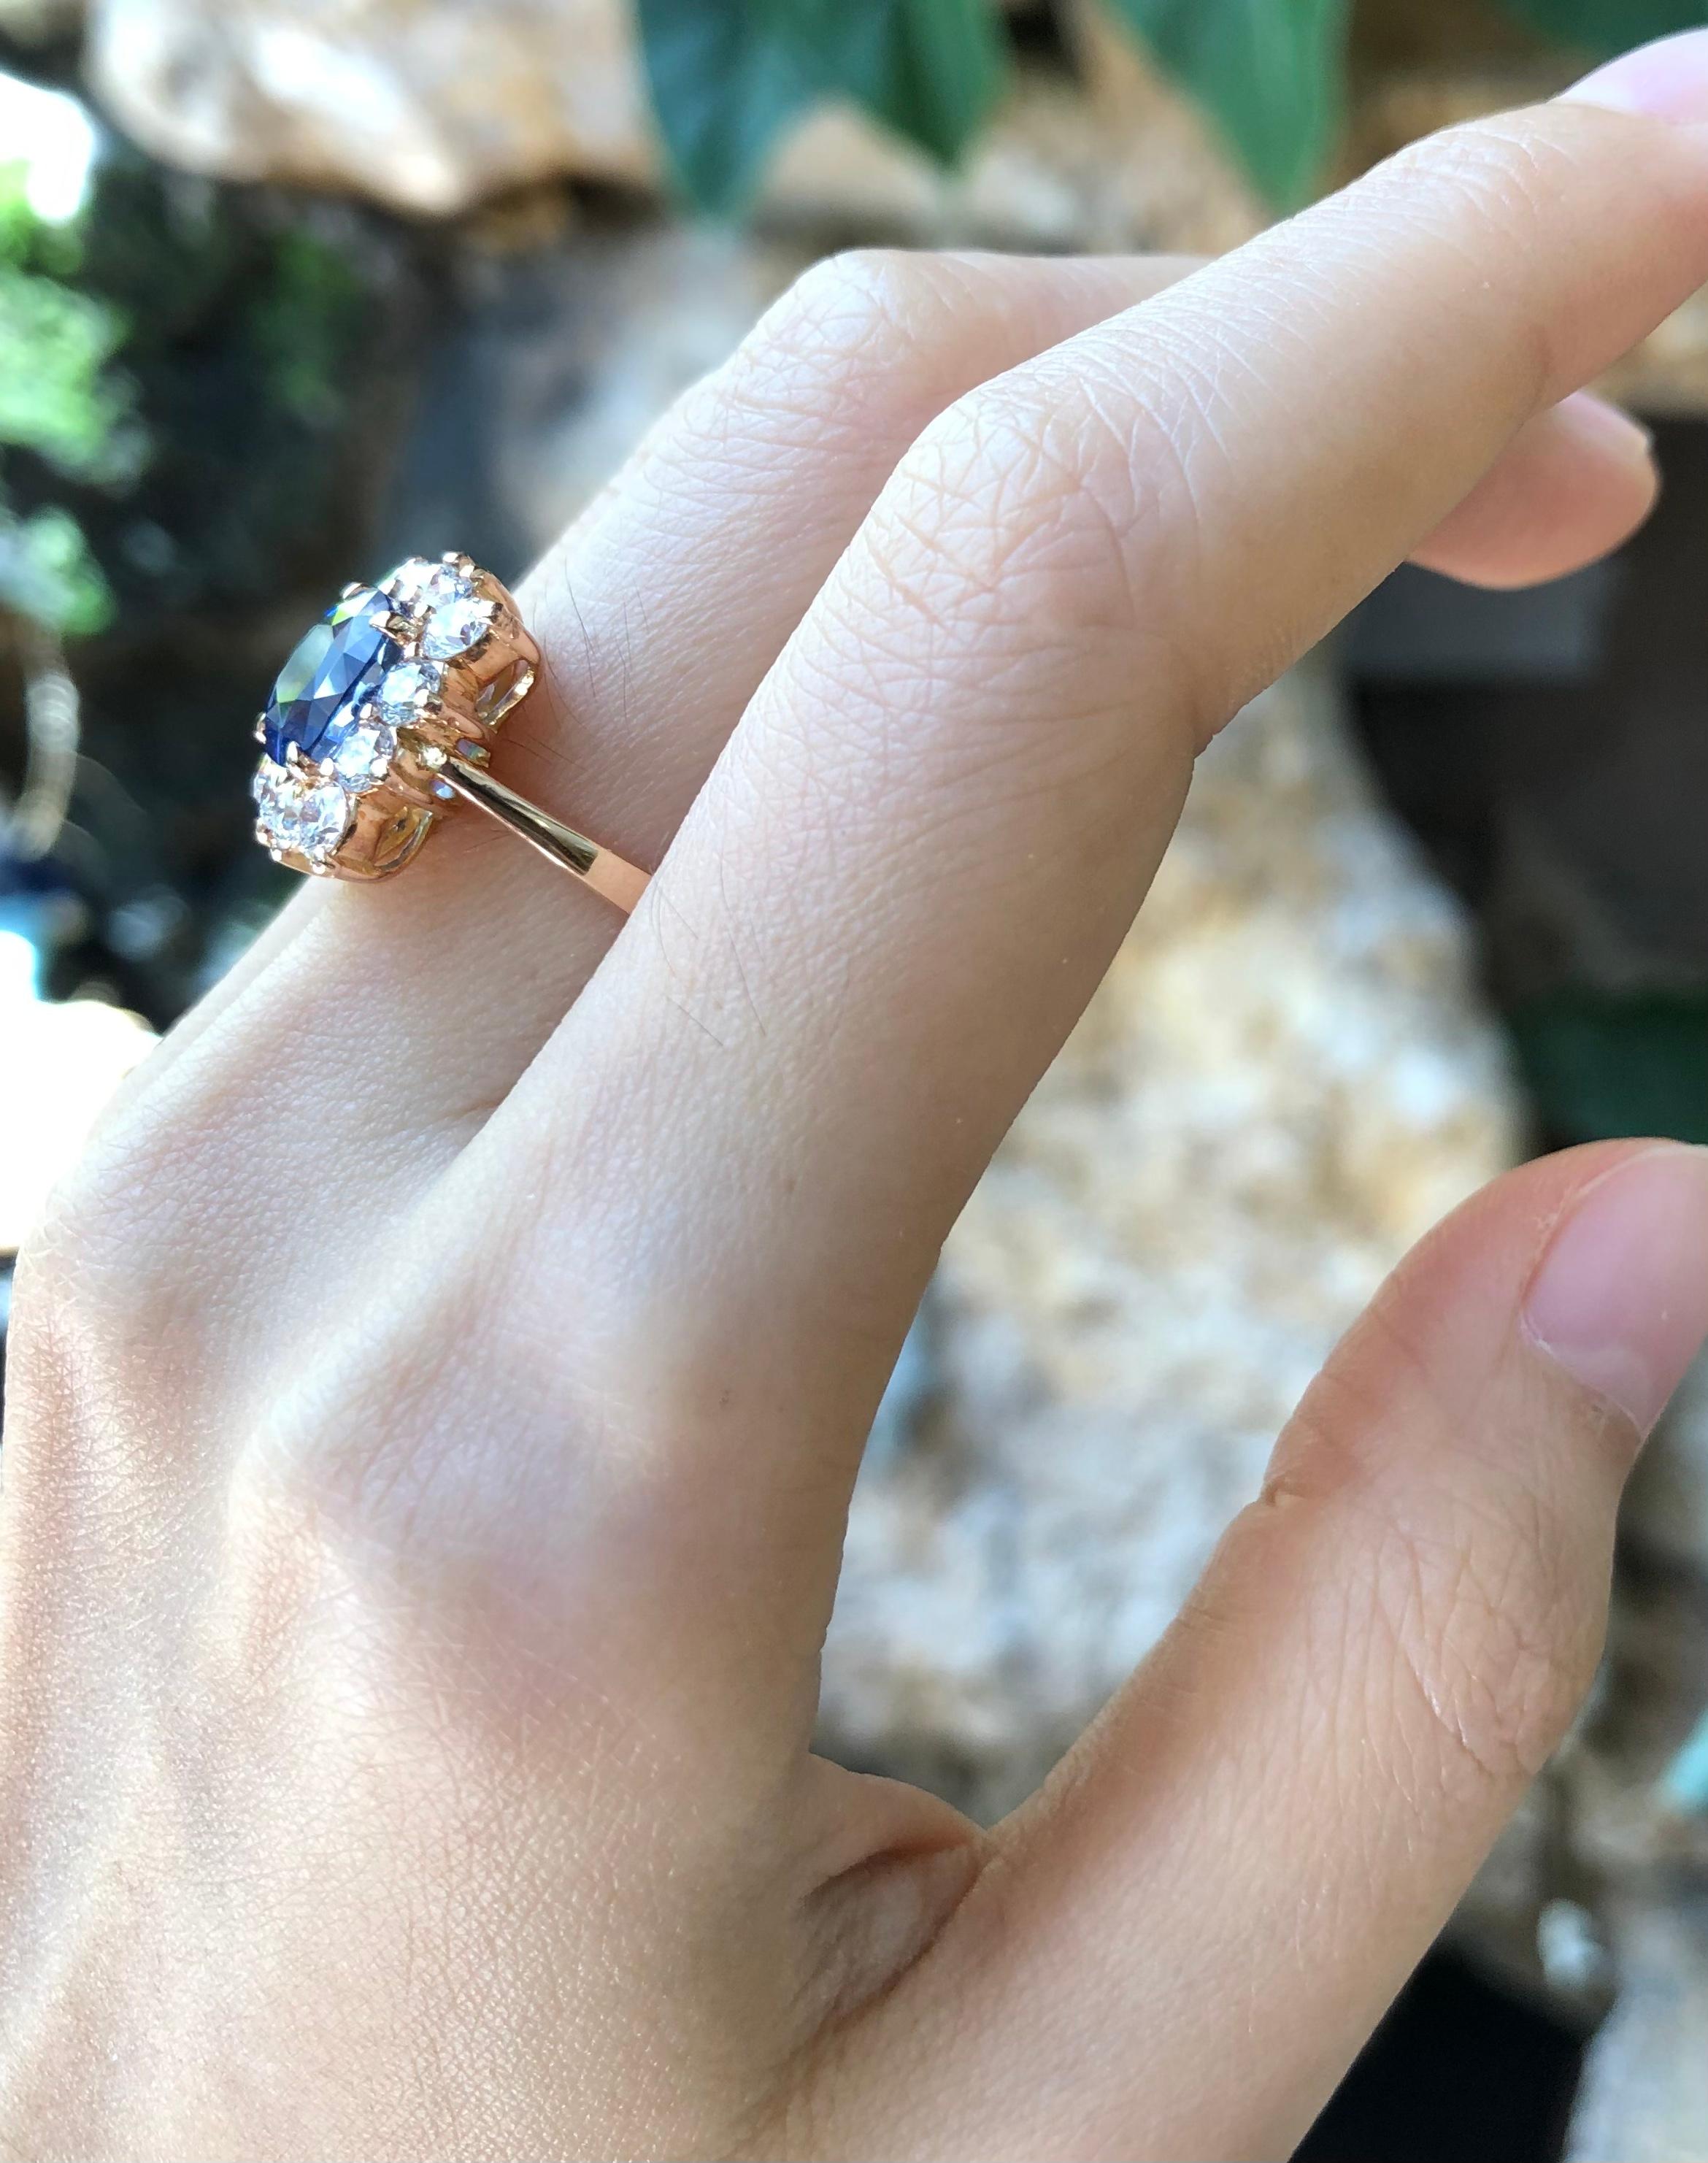 Certified Unheated Cornflower Blue Sapphire 4.11 carats with Diamond 1.37 carats Ring set in 18 Karat Rose Gold Settings
(Lotus Gemology)

Width:  1.4 cm 
Length:  1.4 cm
Ring Size: 52
Total Weight: 7.45 grams

Blue Sapphire
Width:  0.8 cm 
Length: 